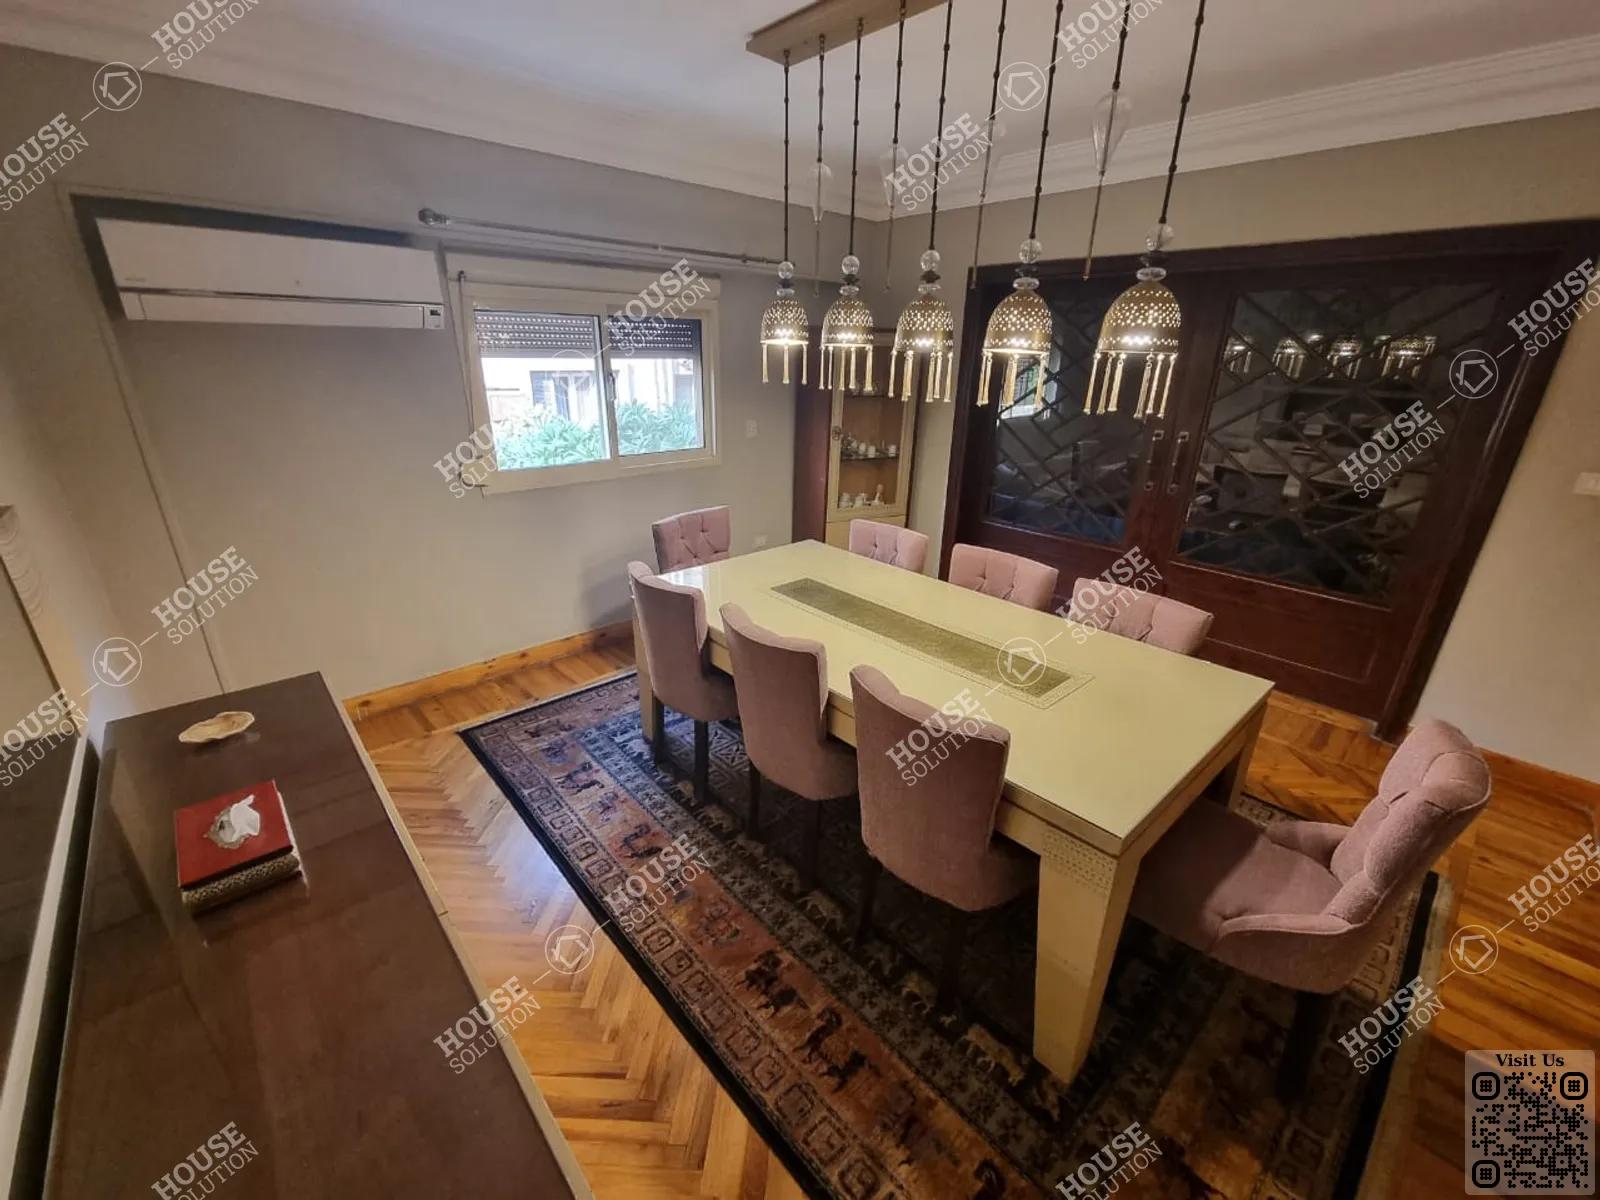 DINING AREA @ Apartments For Rent In Maadi Maadi Sarayat Area: 180 m² consists of 3 Bedrooms 2 Bathrooms Modern furnished 5 stars #5630-2